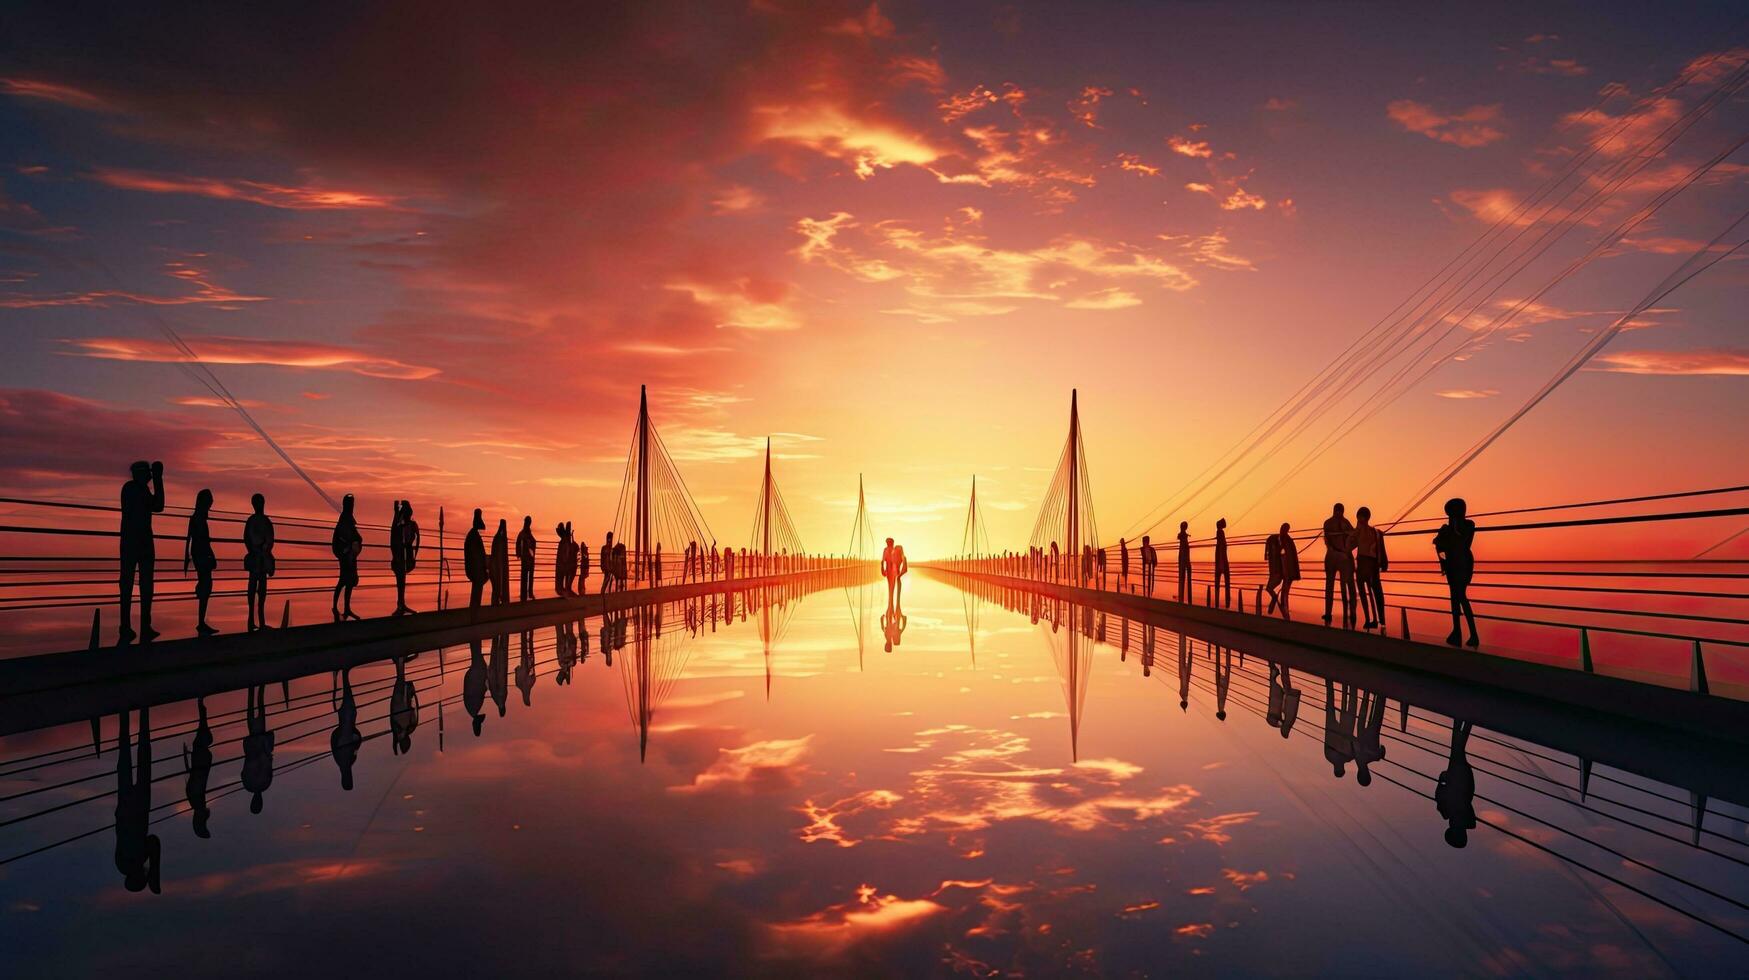 Many tourists walking on the cable stayed bridge create a beautiful silhouette against a dreamy sunset photo